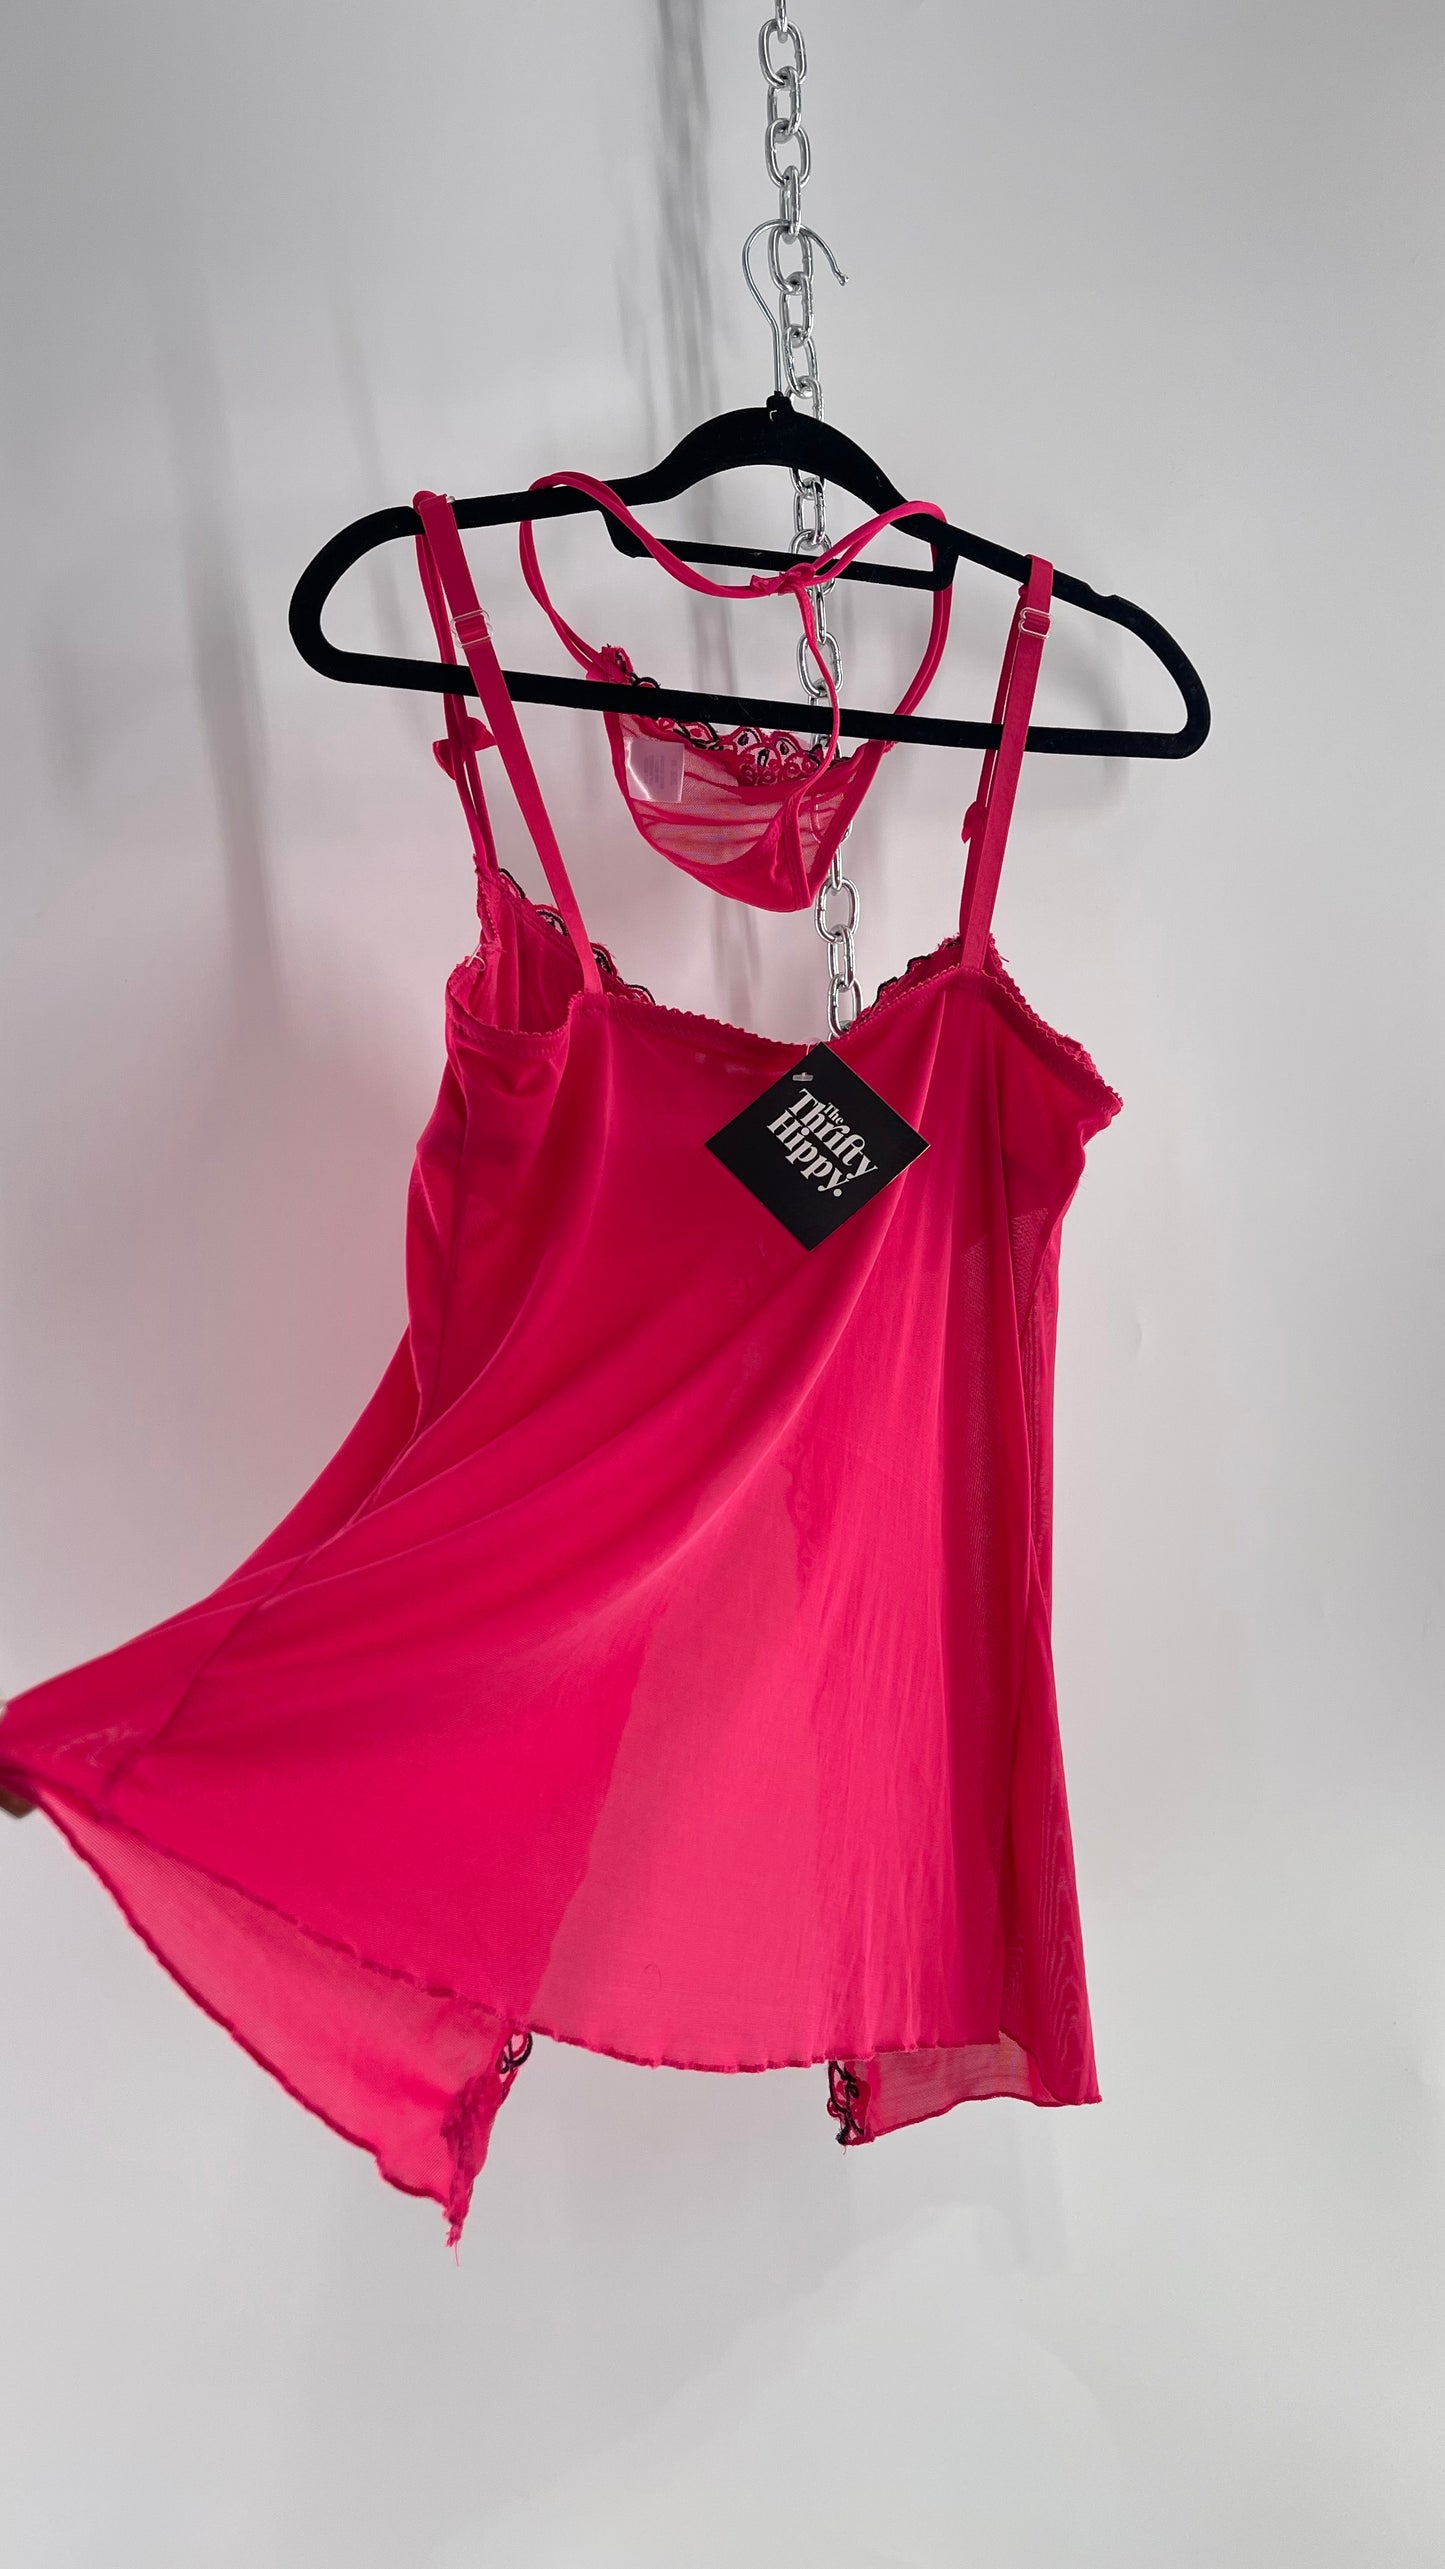 Vintage HOT Hot Pink Vented Babydoll Top and Thong Set with Black Embroidery and Bows (Medium)